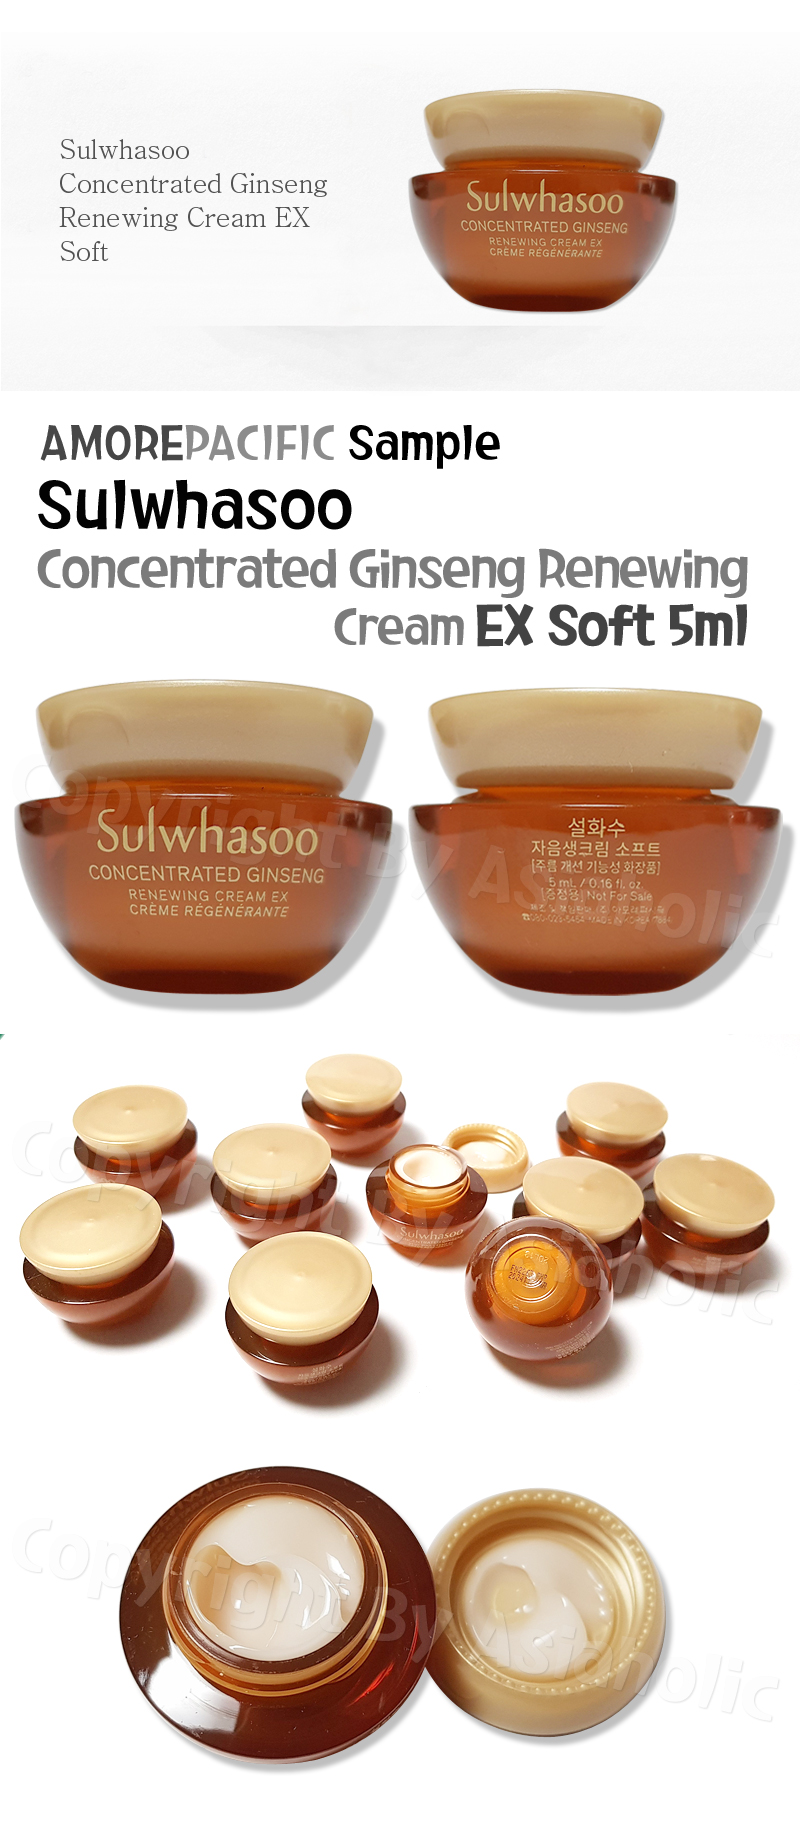 Sulwhasoo Concentrated Ginseng Renewing Cream EX Soft 5ml x 20pcs (100ml) Newest Version